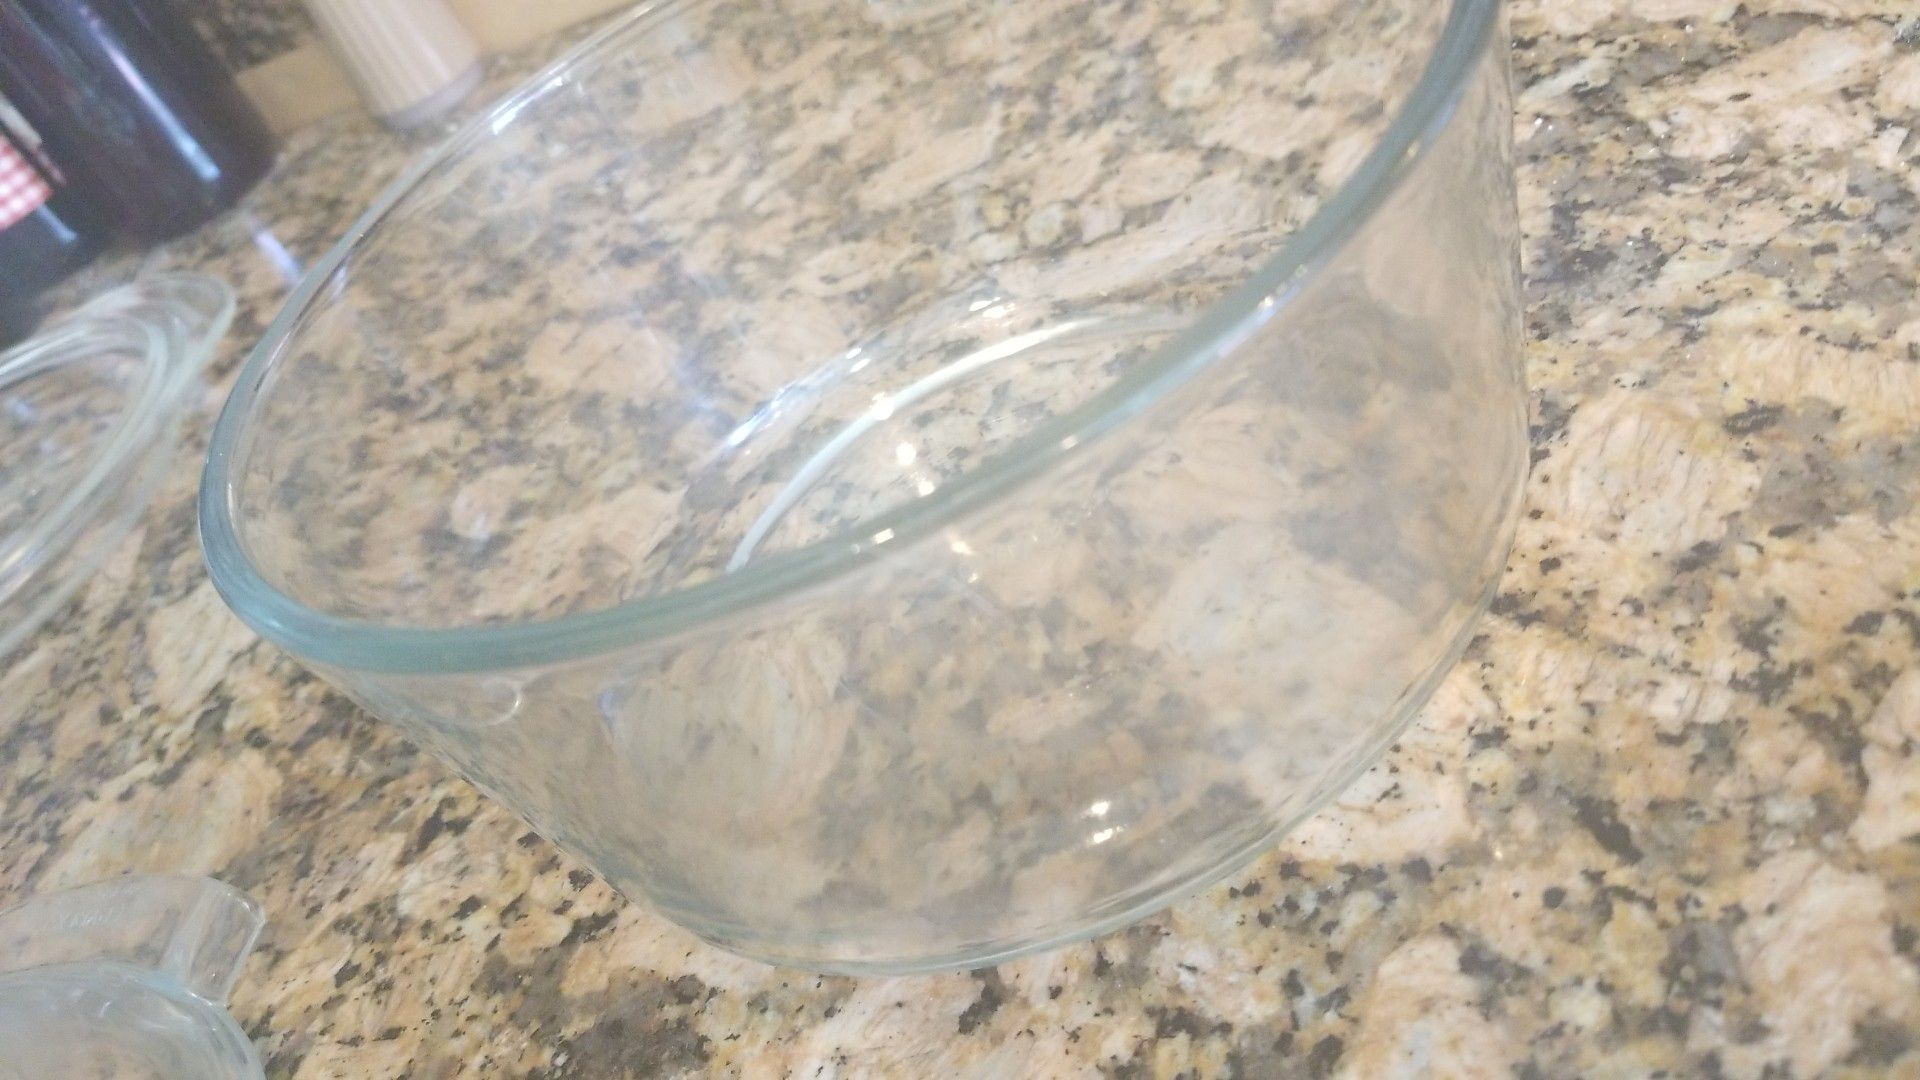 Pyrex 7203 7-Cup Round Clear Glass Food Storage Bowl